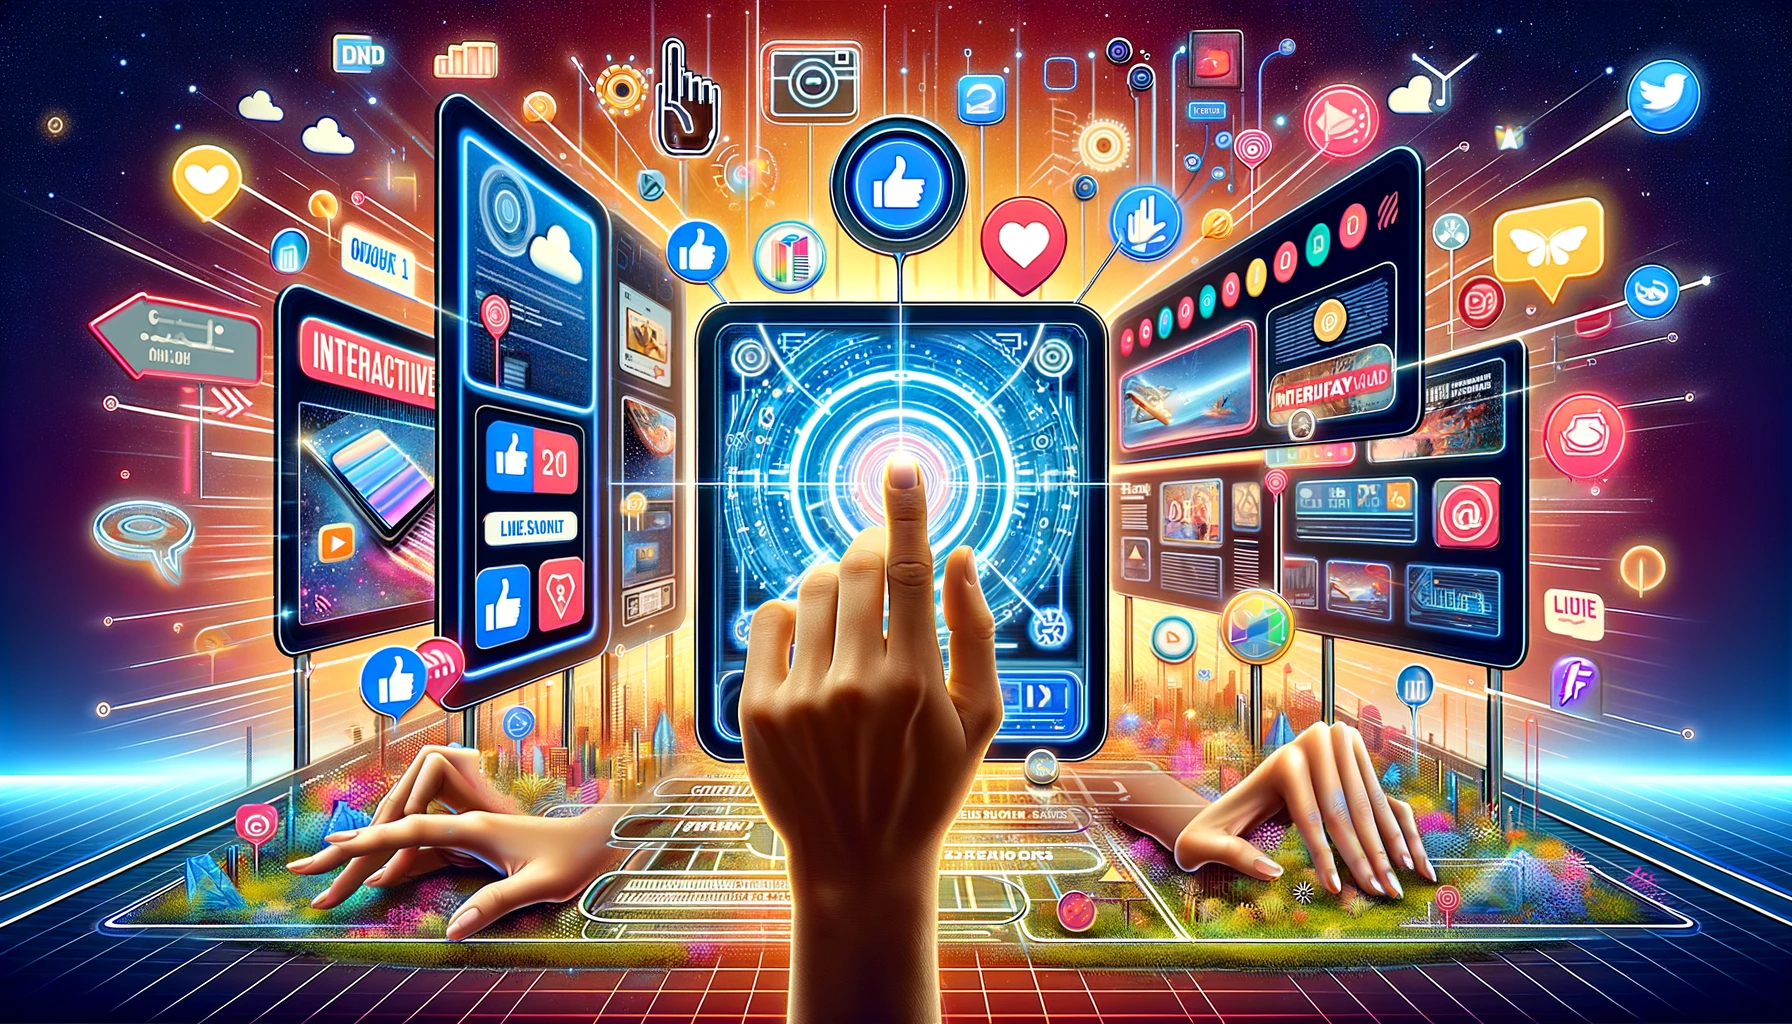 A digital environment featuring 'Interactive Display Ads' with elements like touchscreens, video players, and quizzes on digital billboards, highlighted by hands reaching out and engagement icons like likes and shares.